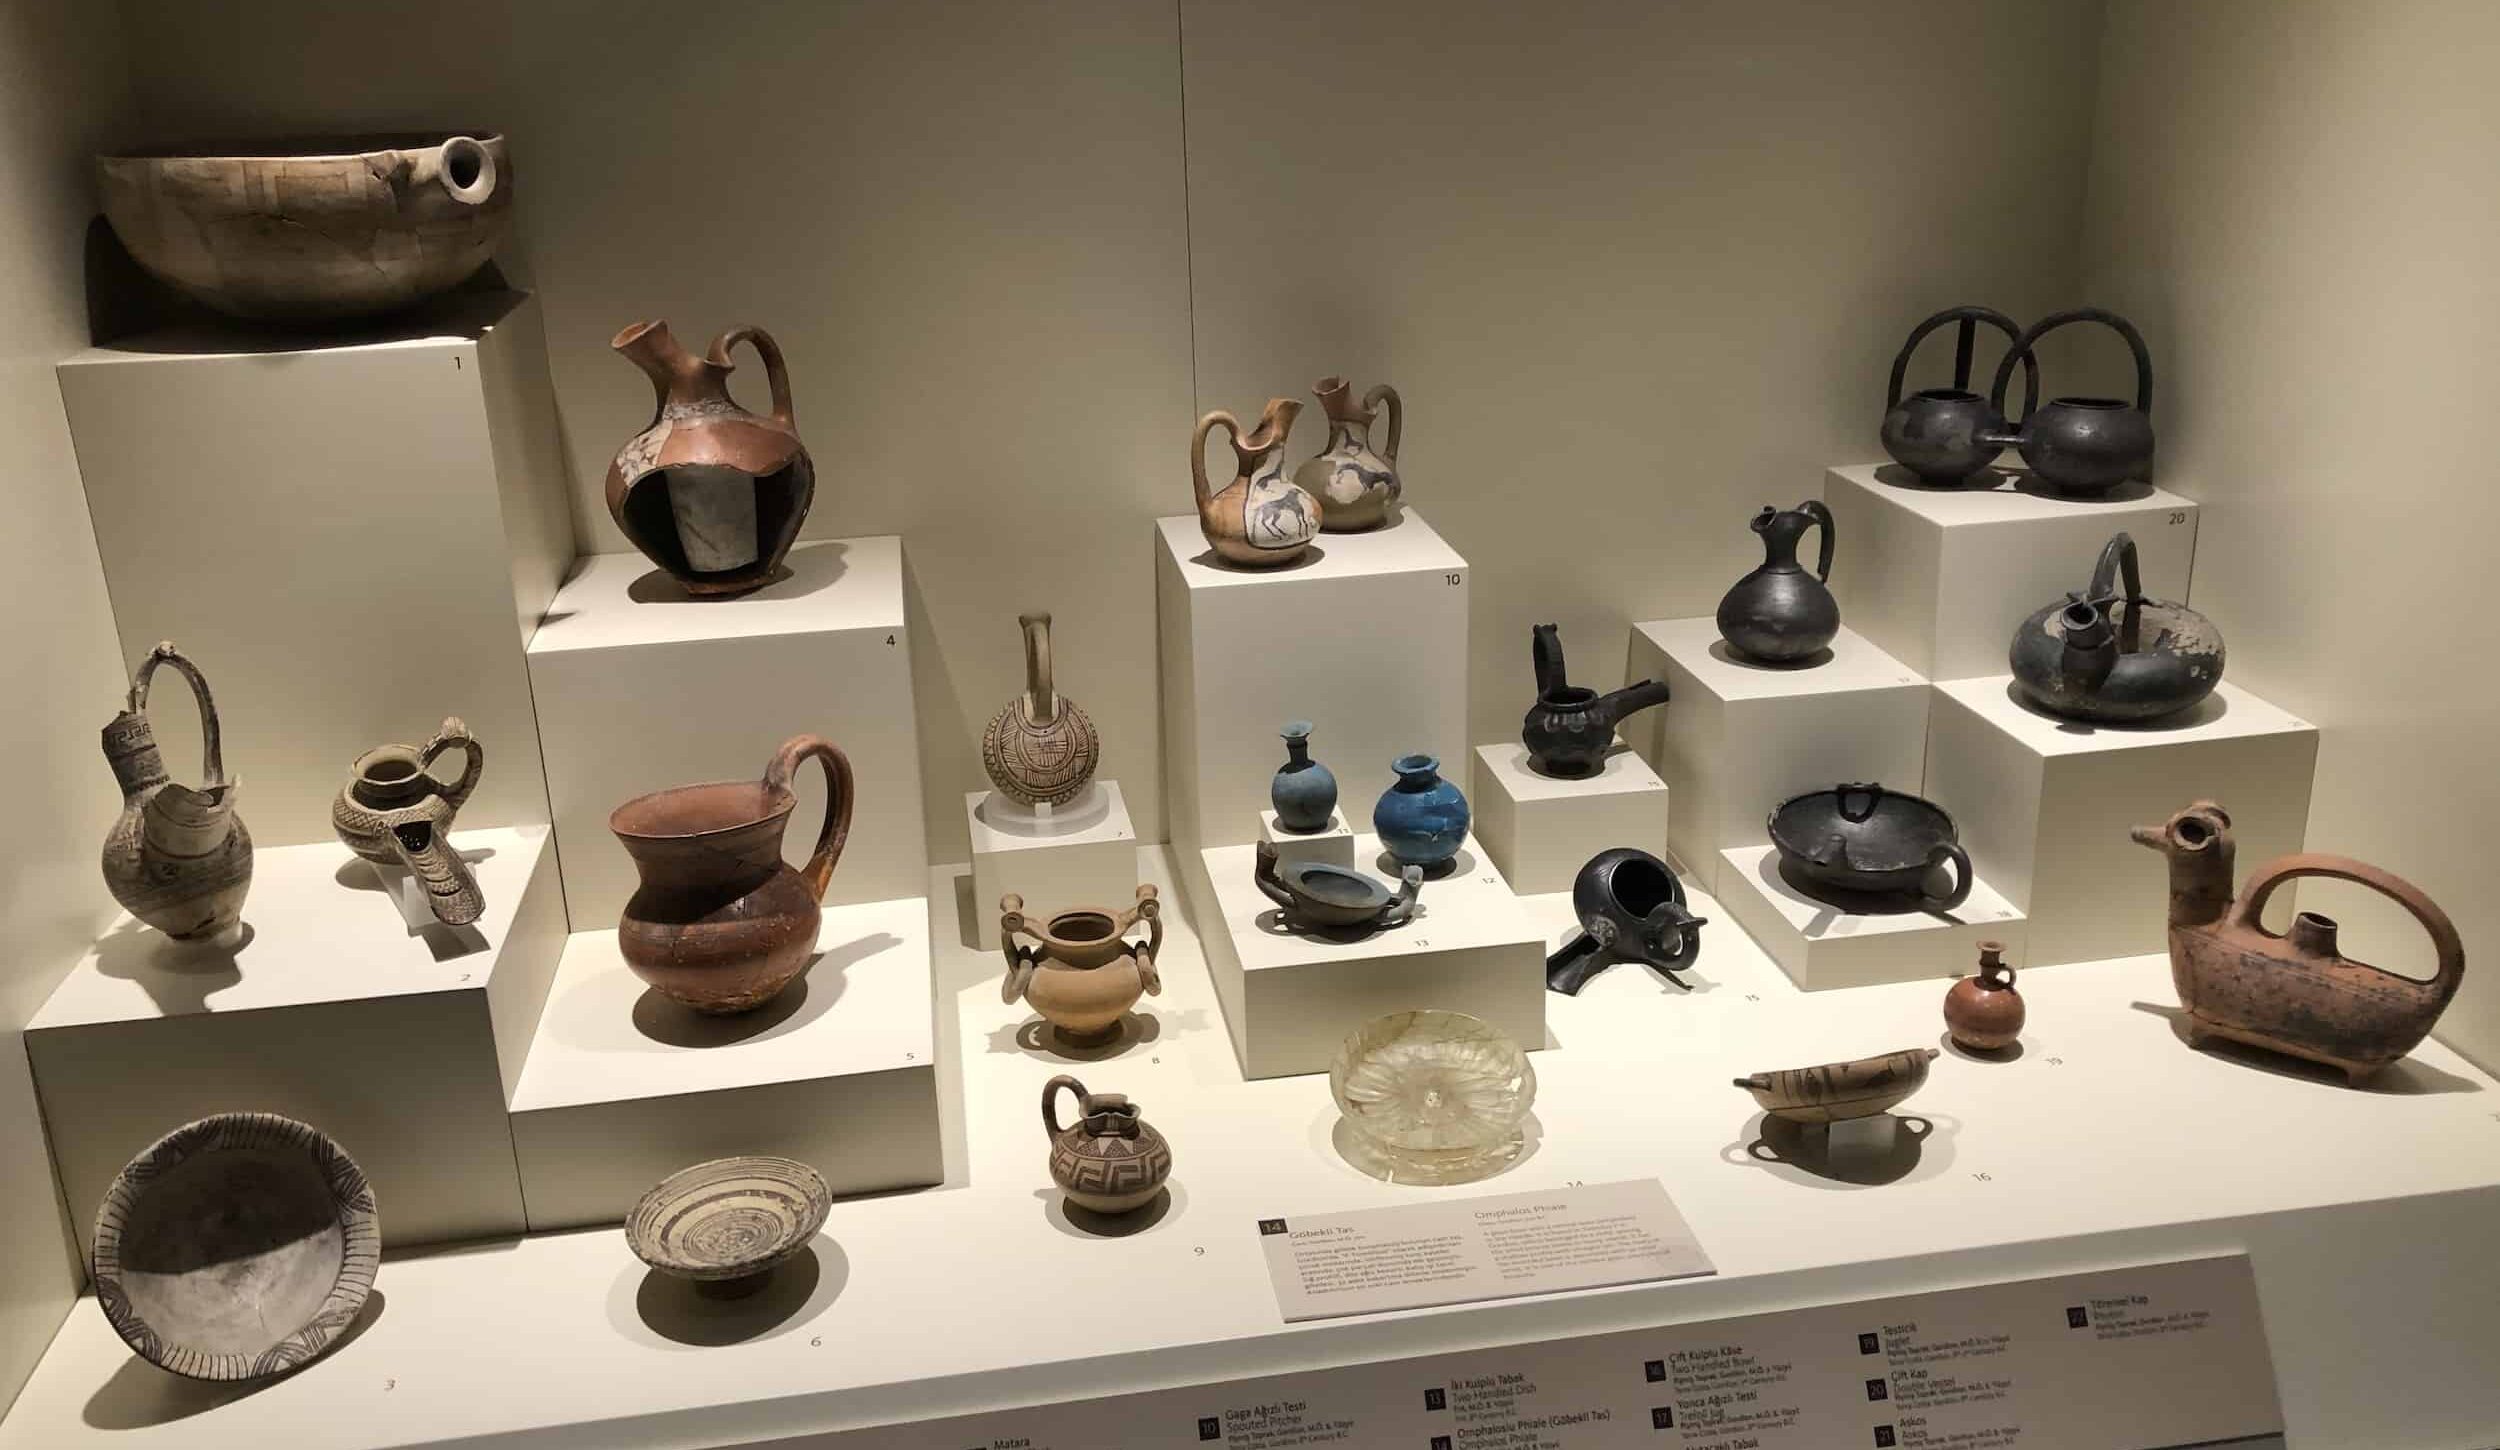 Artifacts from the Phrygian period at the Museum of Anatolian Civilizations in Ankara, Turkey